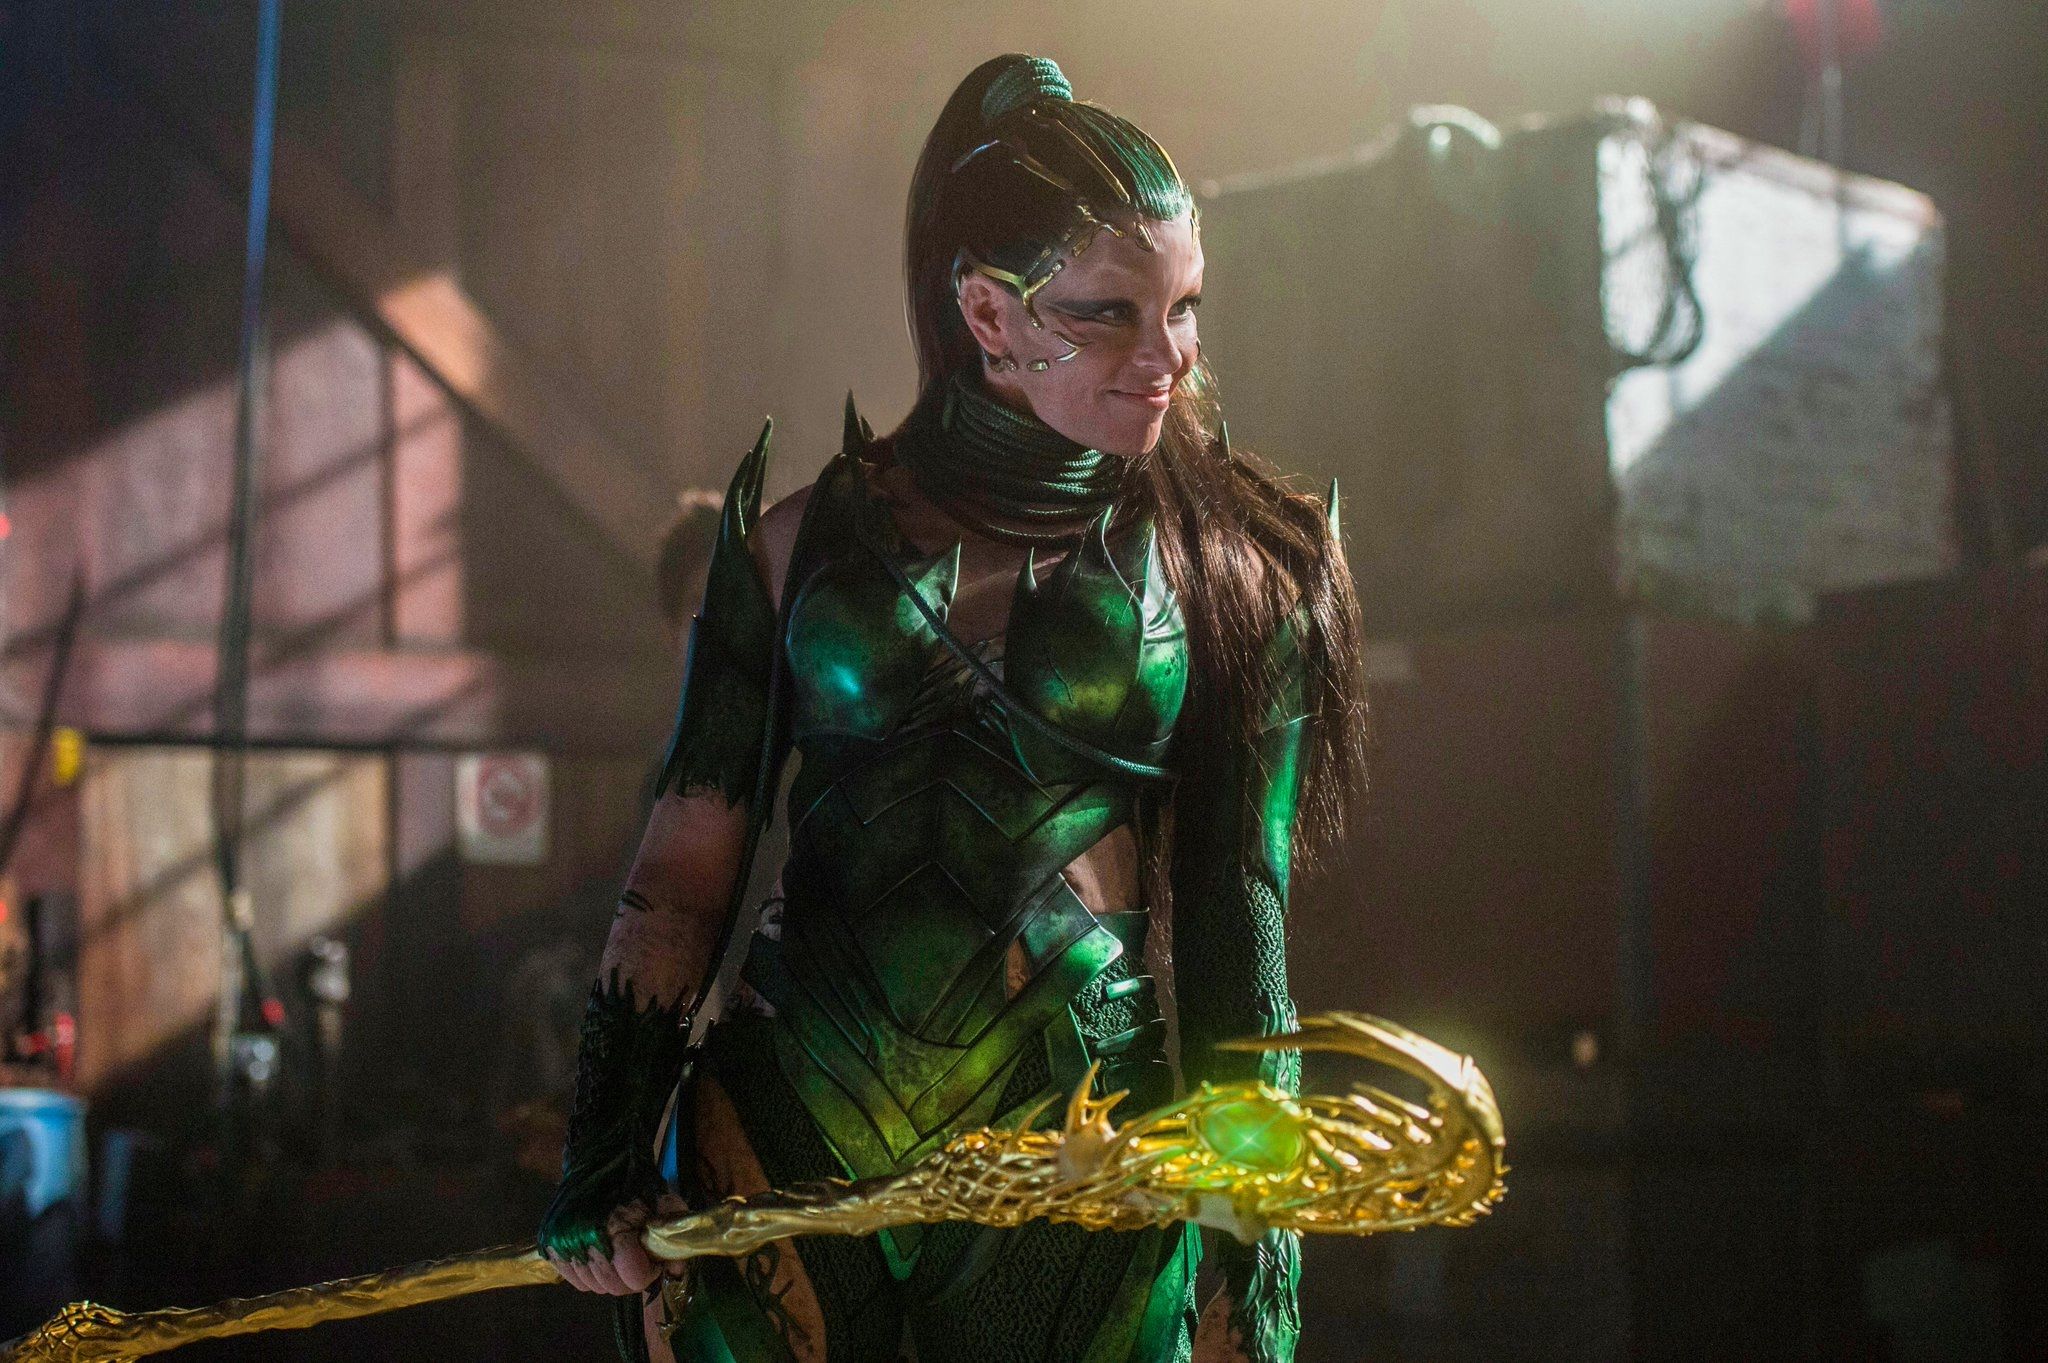 Power Rangers: Rita Repulsa is Ready to Fight in New Image